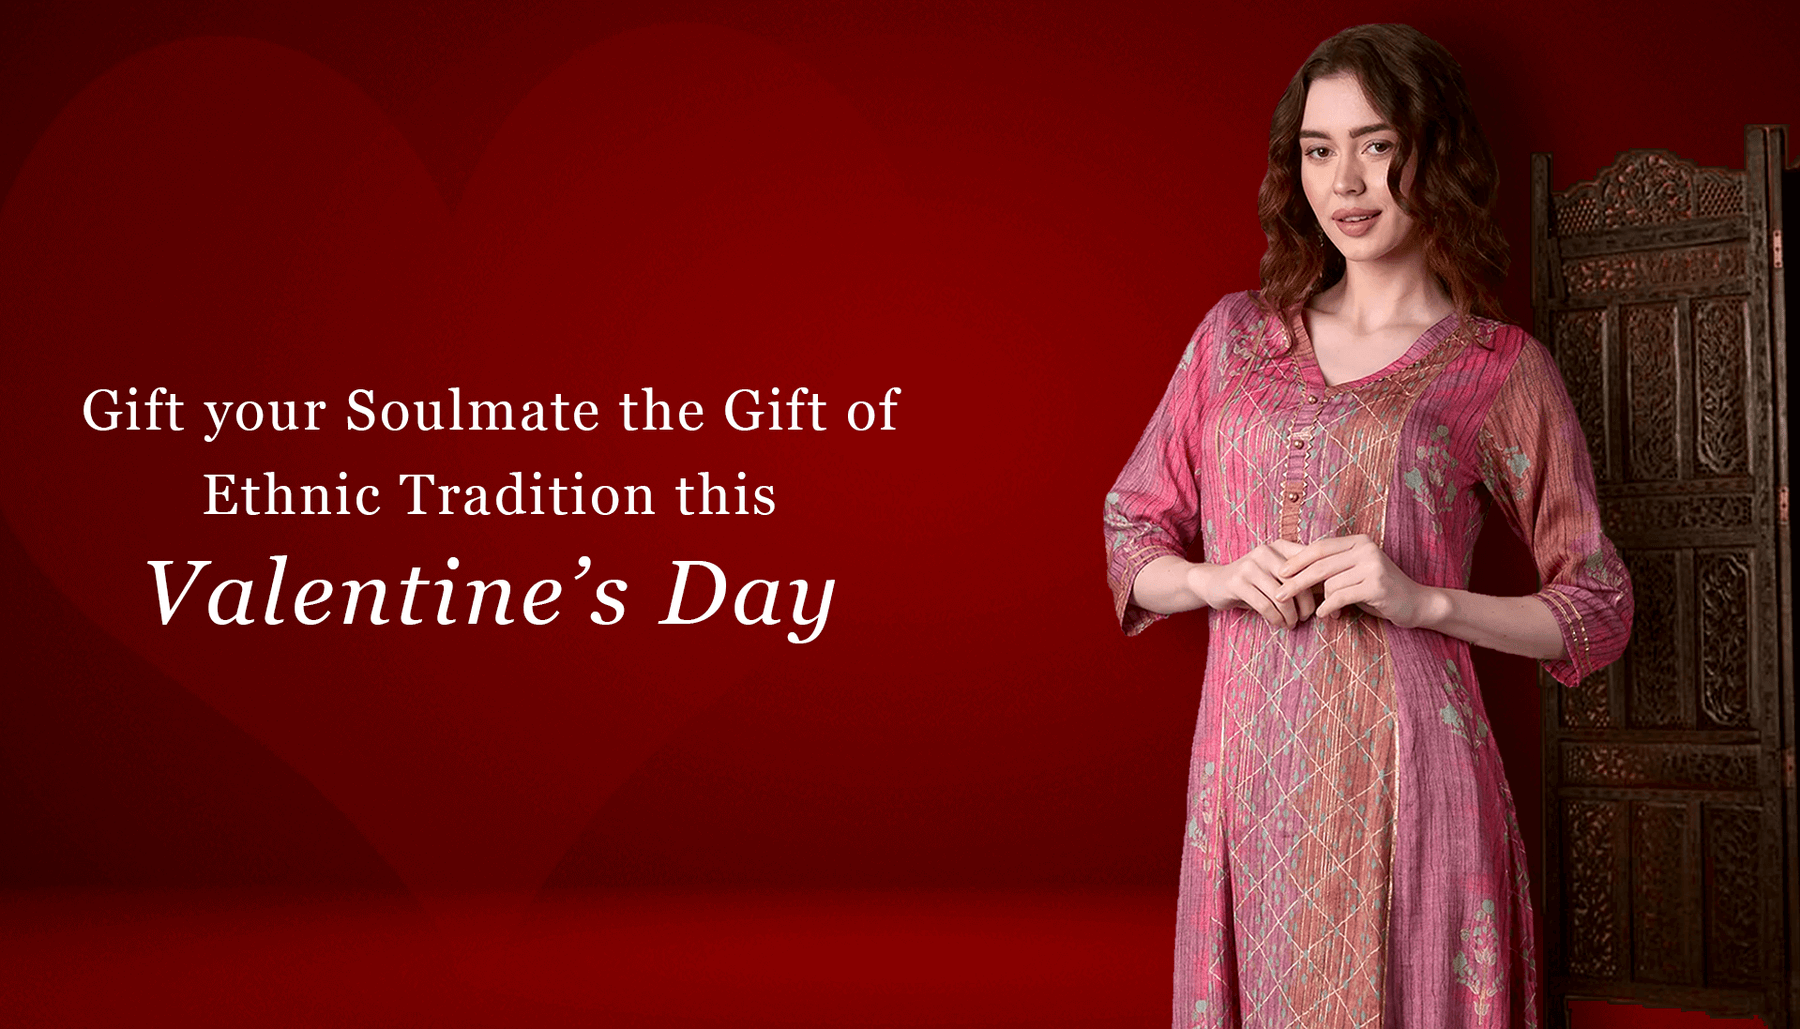 Gift your Soulmate the Gift of Ethnic Tradition this Valentines Day